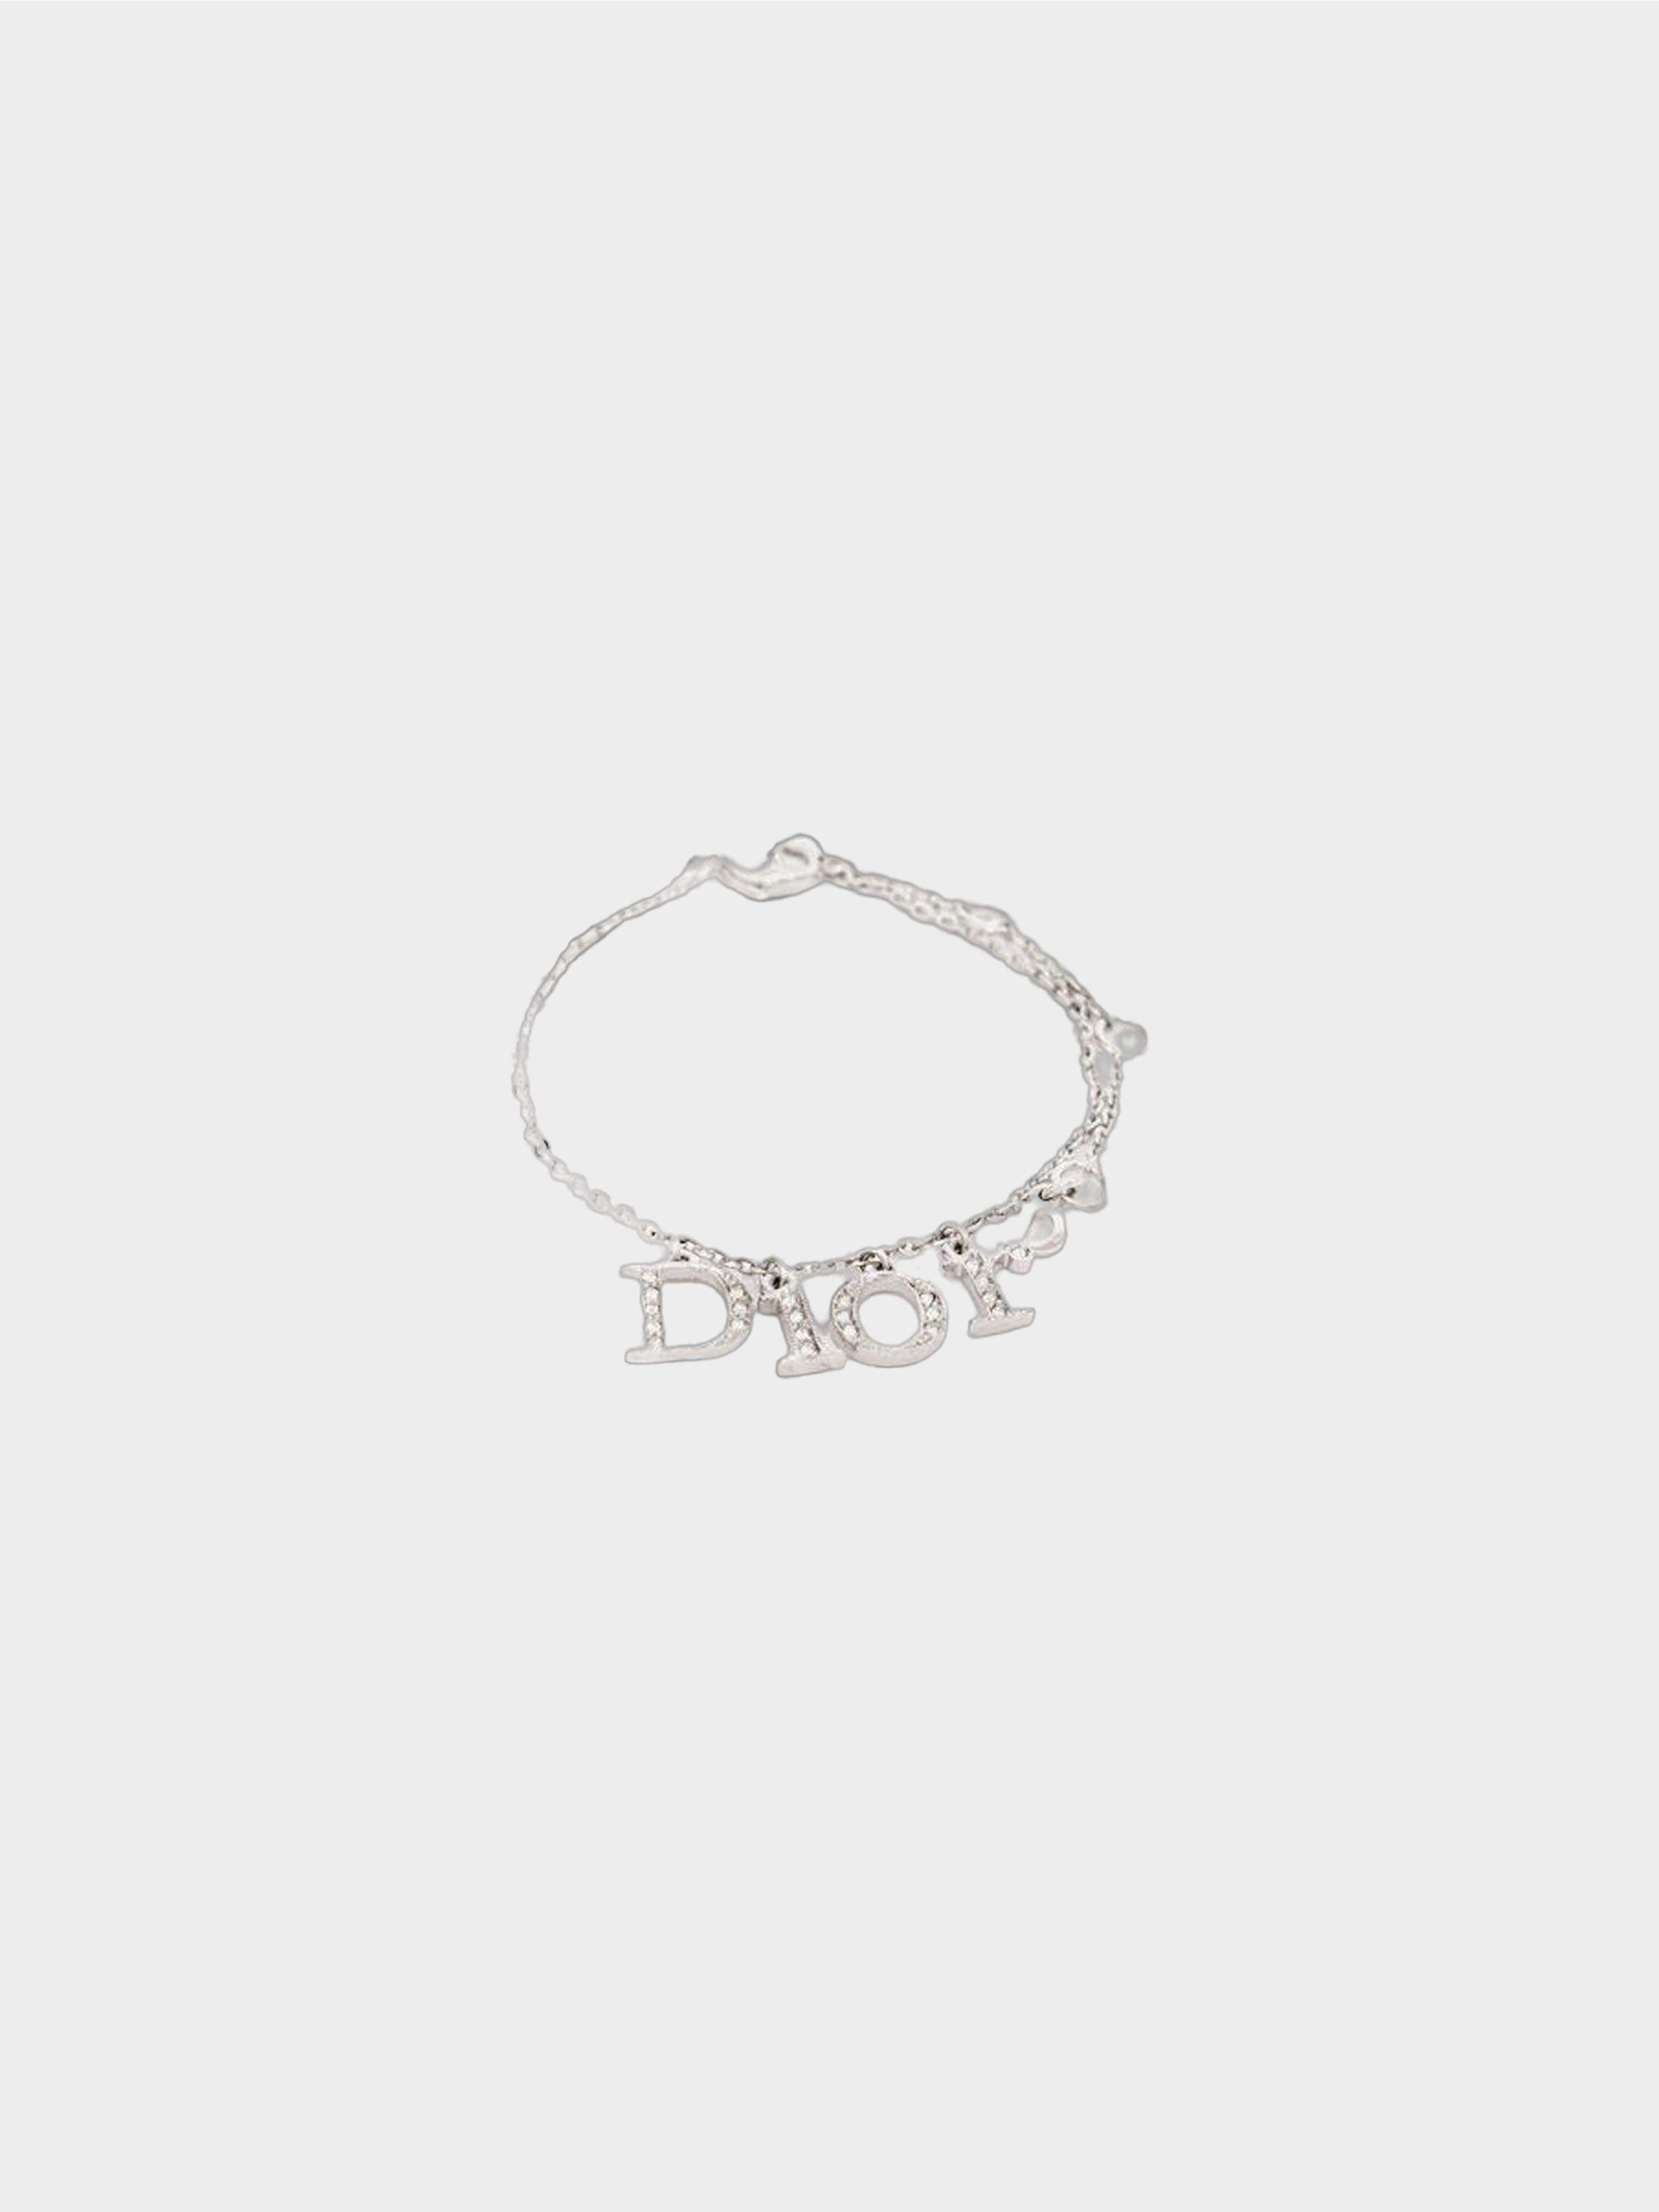 Is Dior Trying To Bring Back Friendship Bracelets?